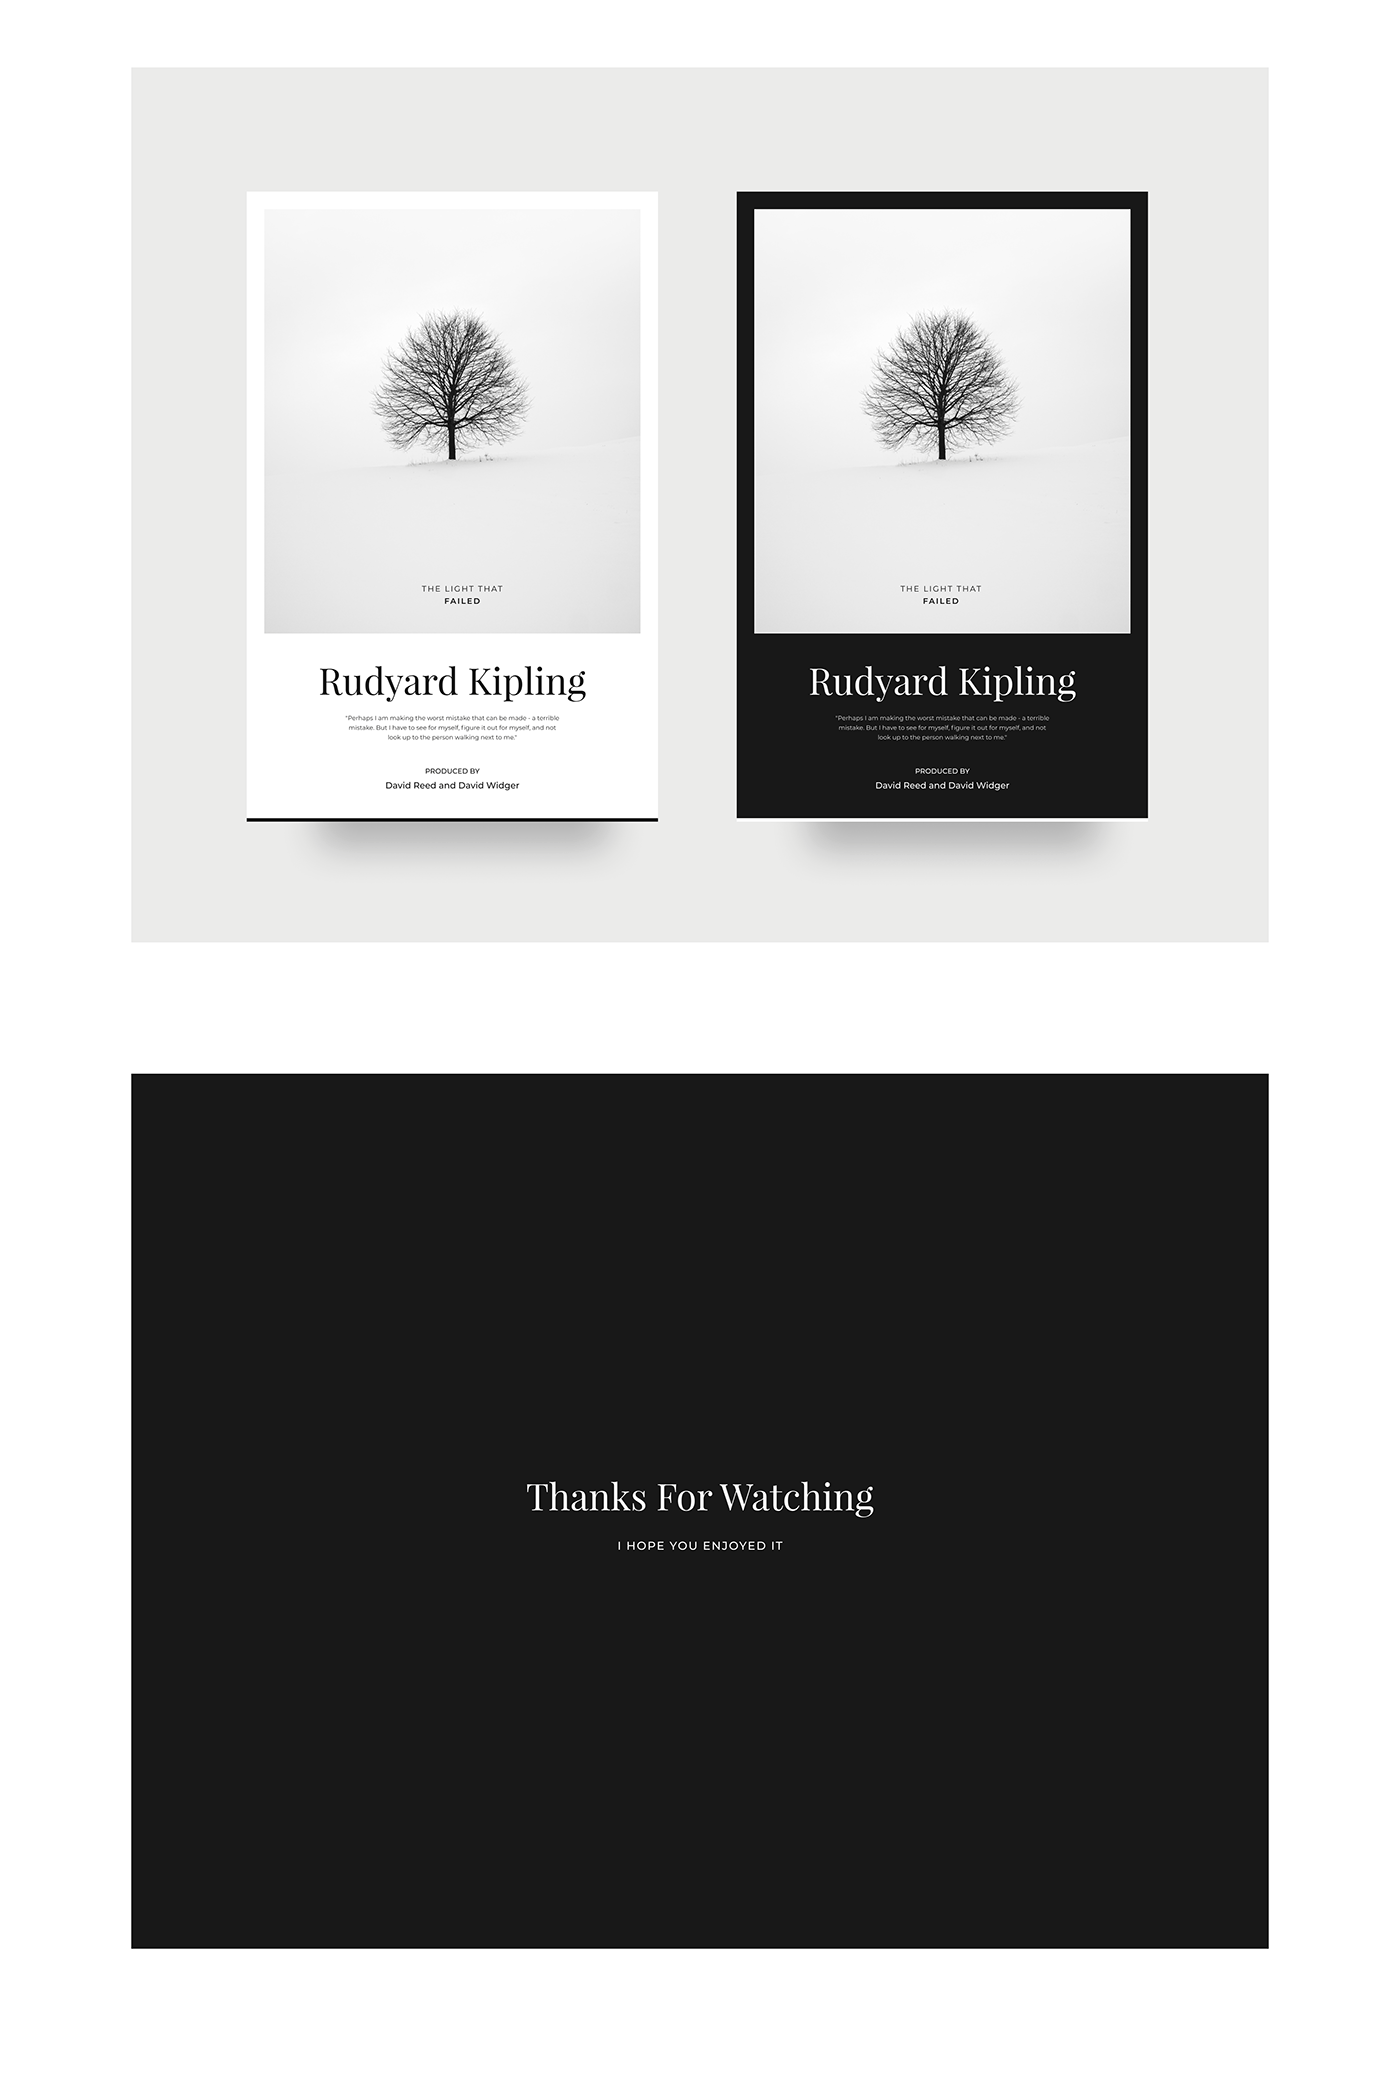 black book culture edition editorial design  publishing   story Style typography   White